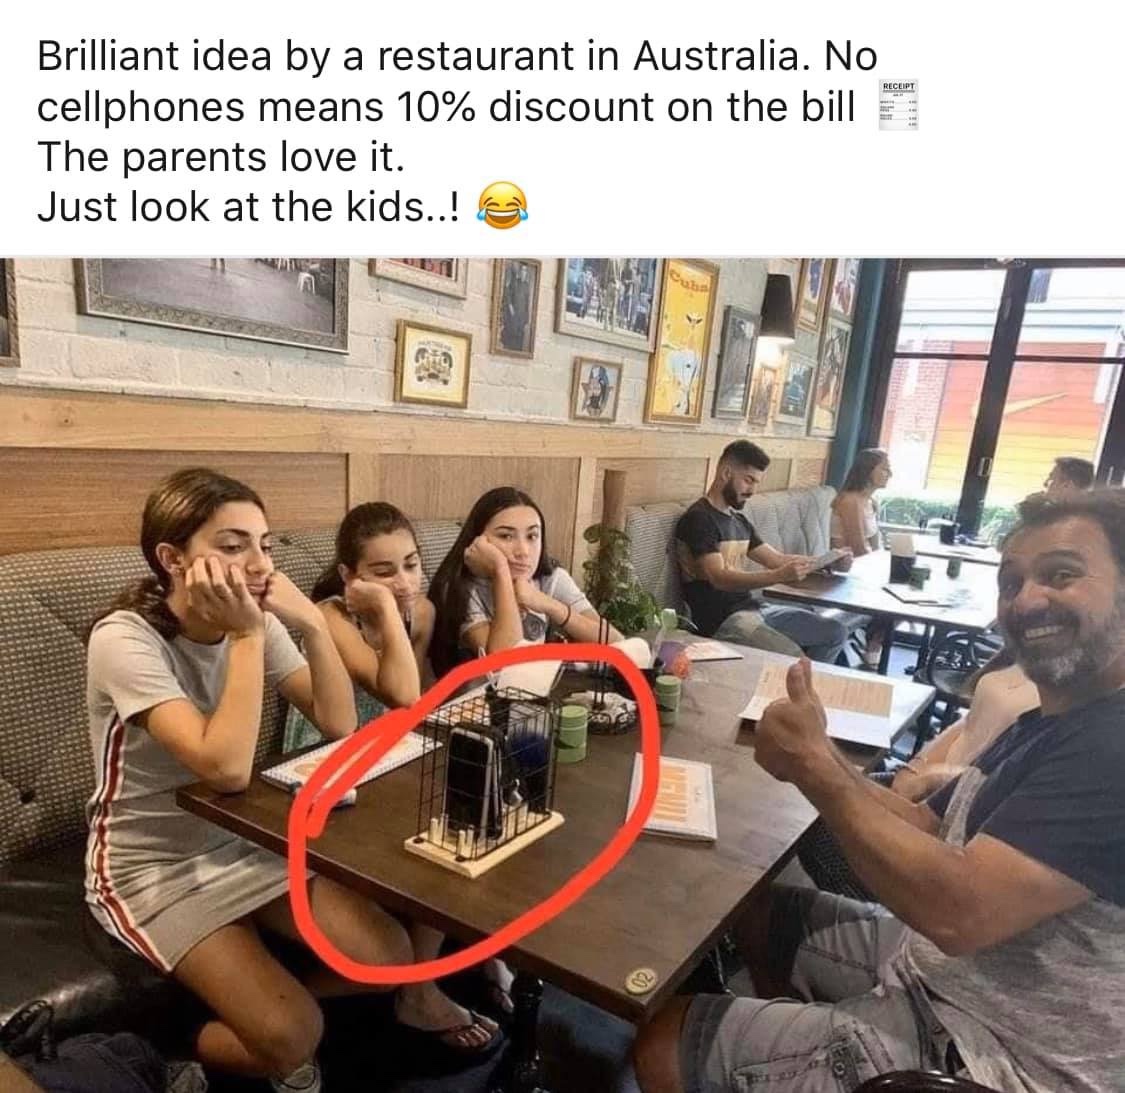 Restaurant - Receipt Brilliant idea by a restaurant in Australia. No cellphones means 10% discount on the bill The parents love it. Just look at the kids..!